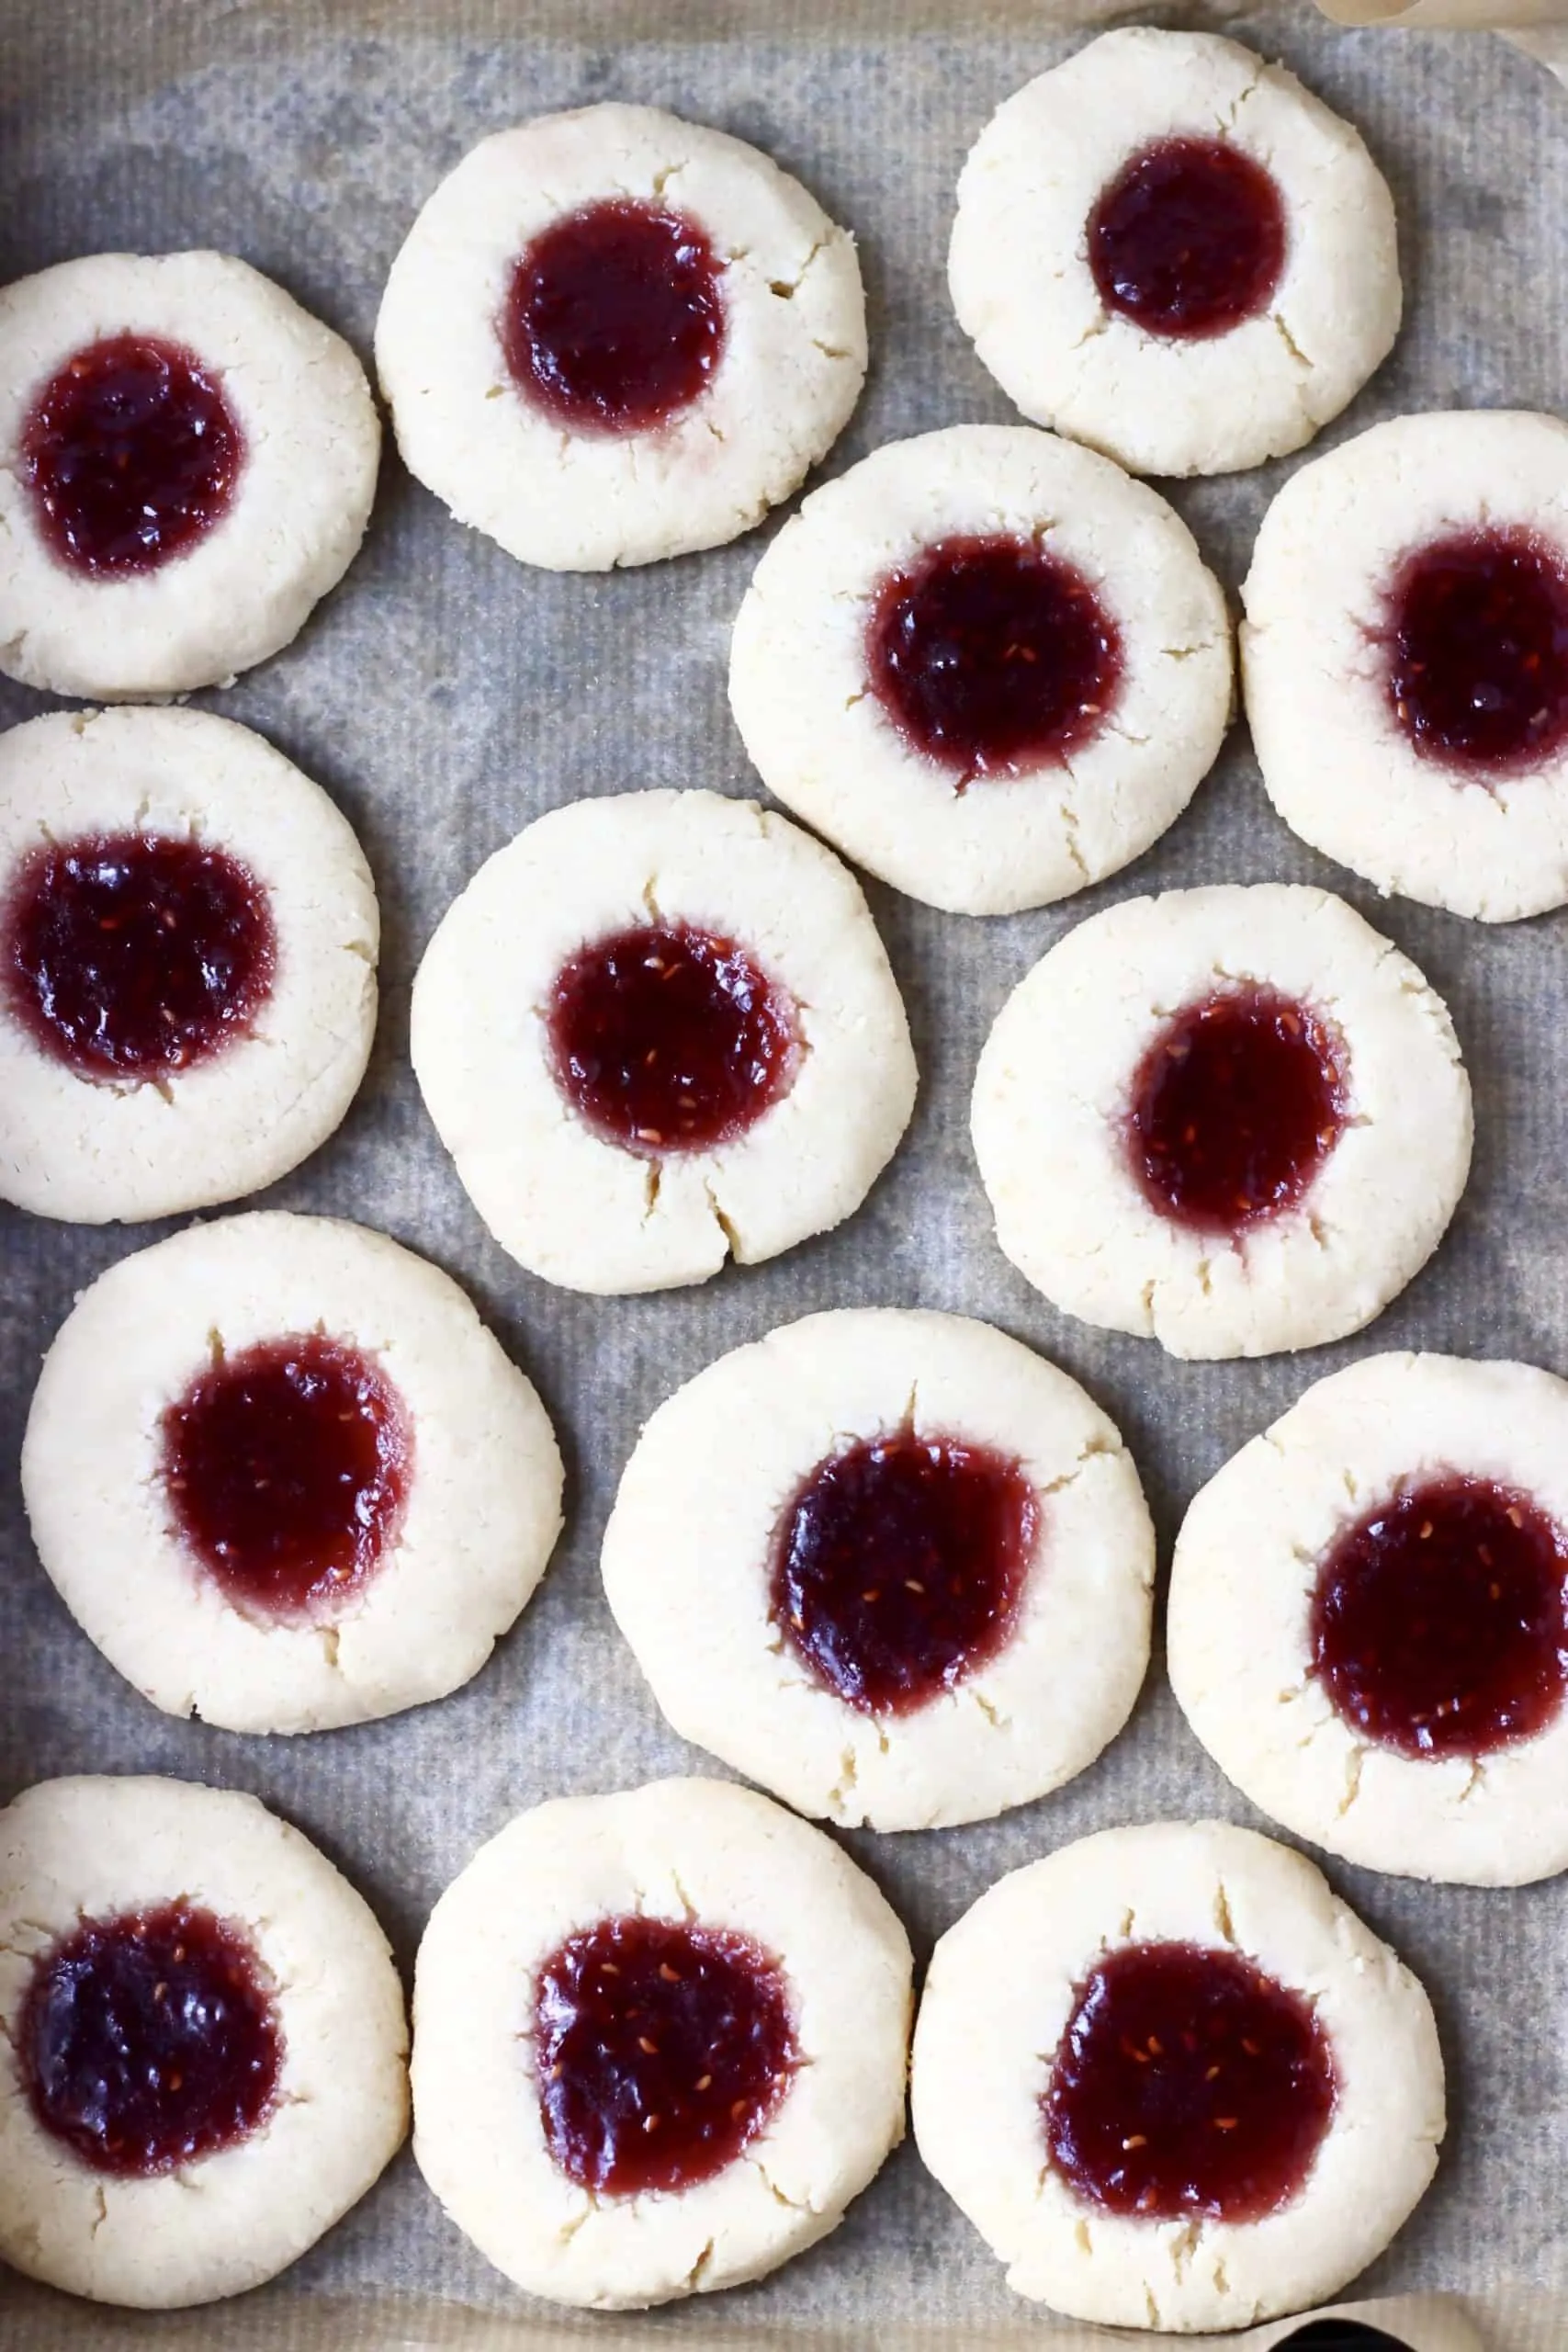 Gluten-free vegan thumbprint cookies filled with raspberry jam on a baking tray lined with baking paper